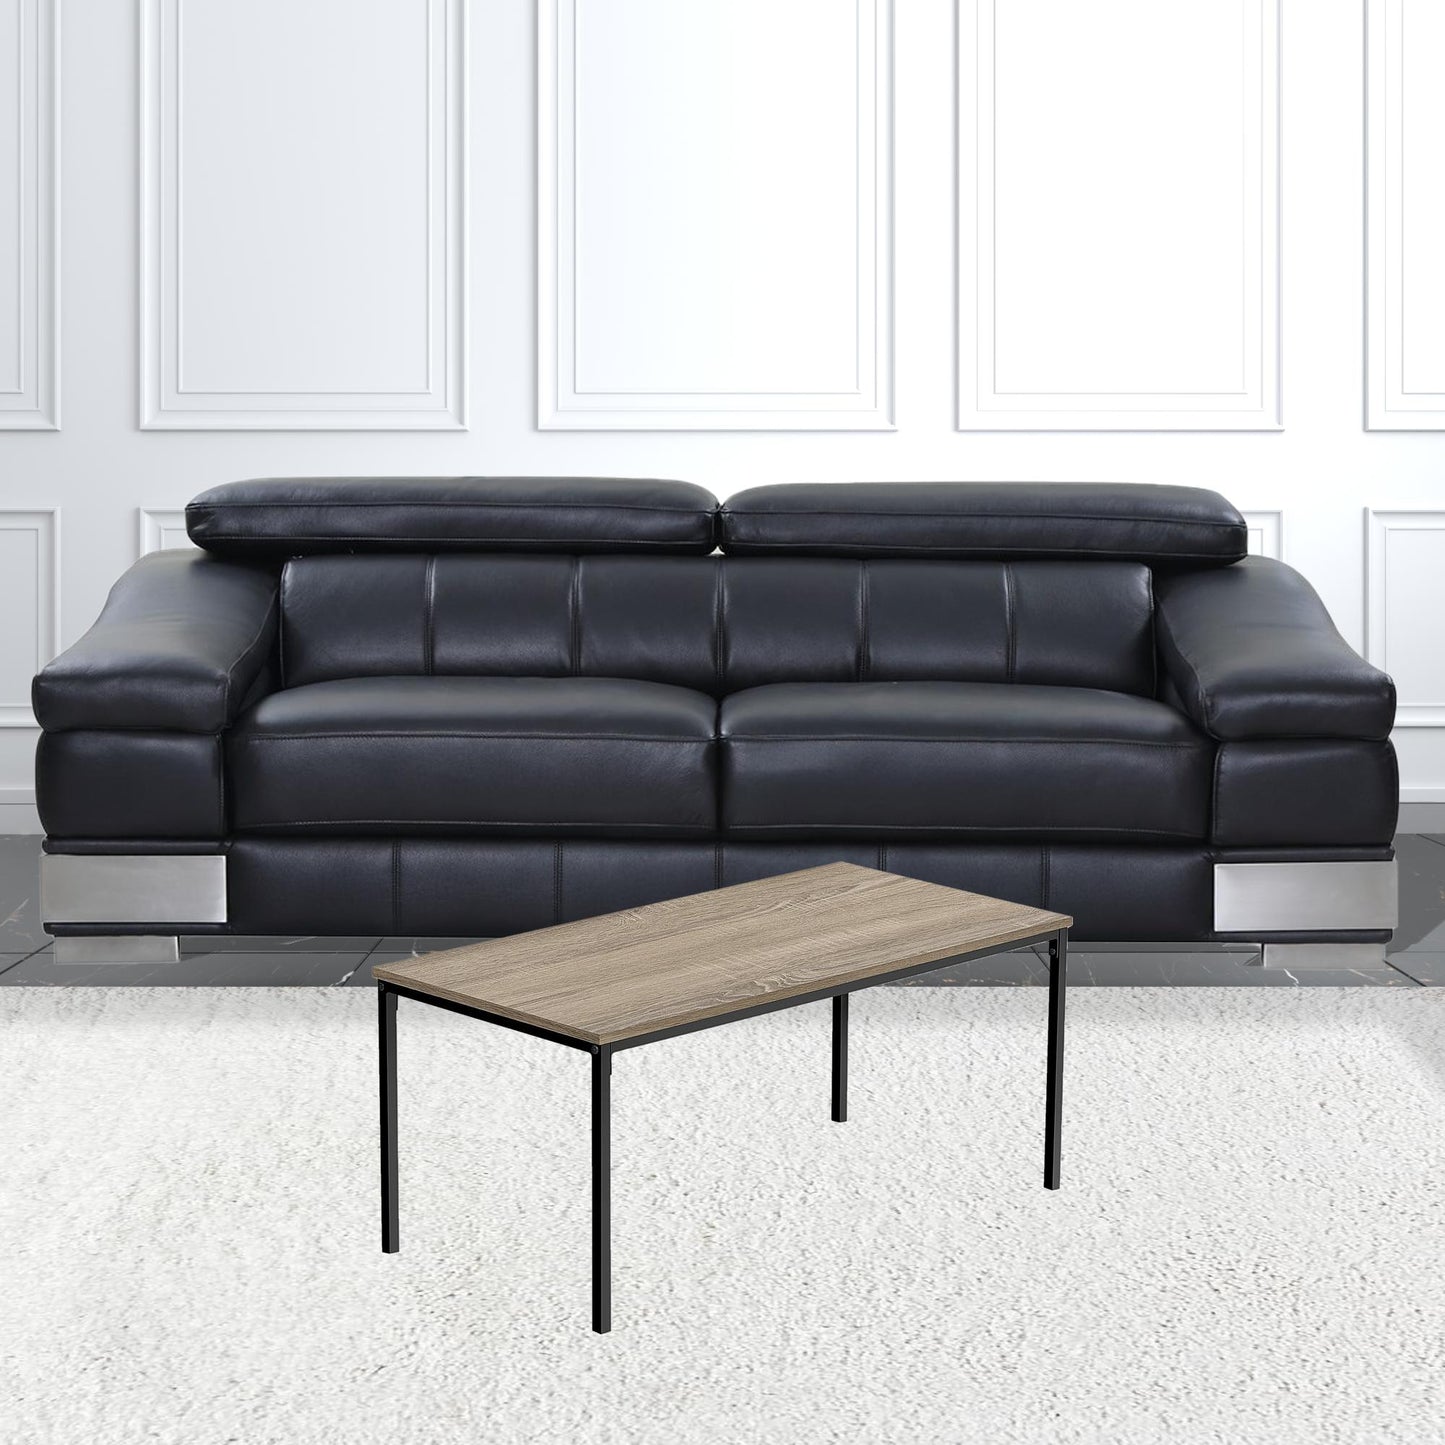 40" Dark Taupe And Black Rectangular Coffee Table By Homeroots